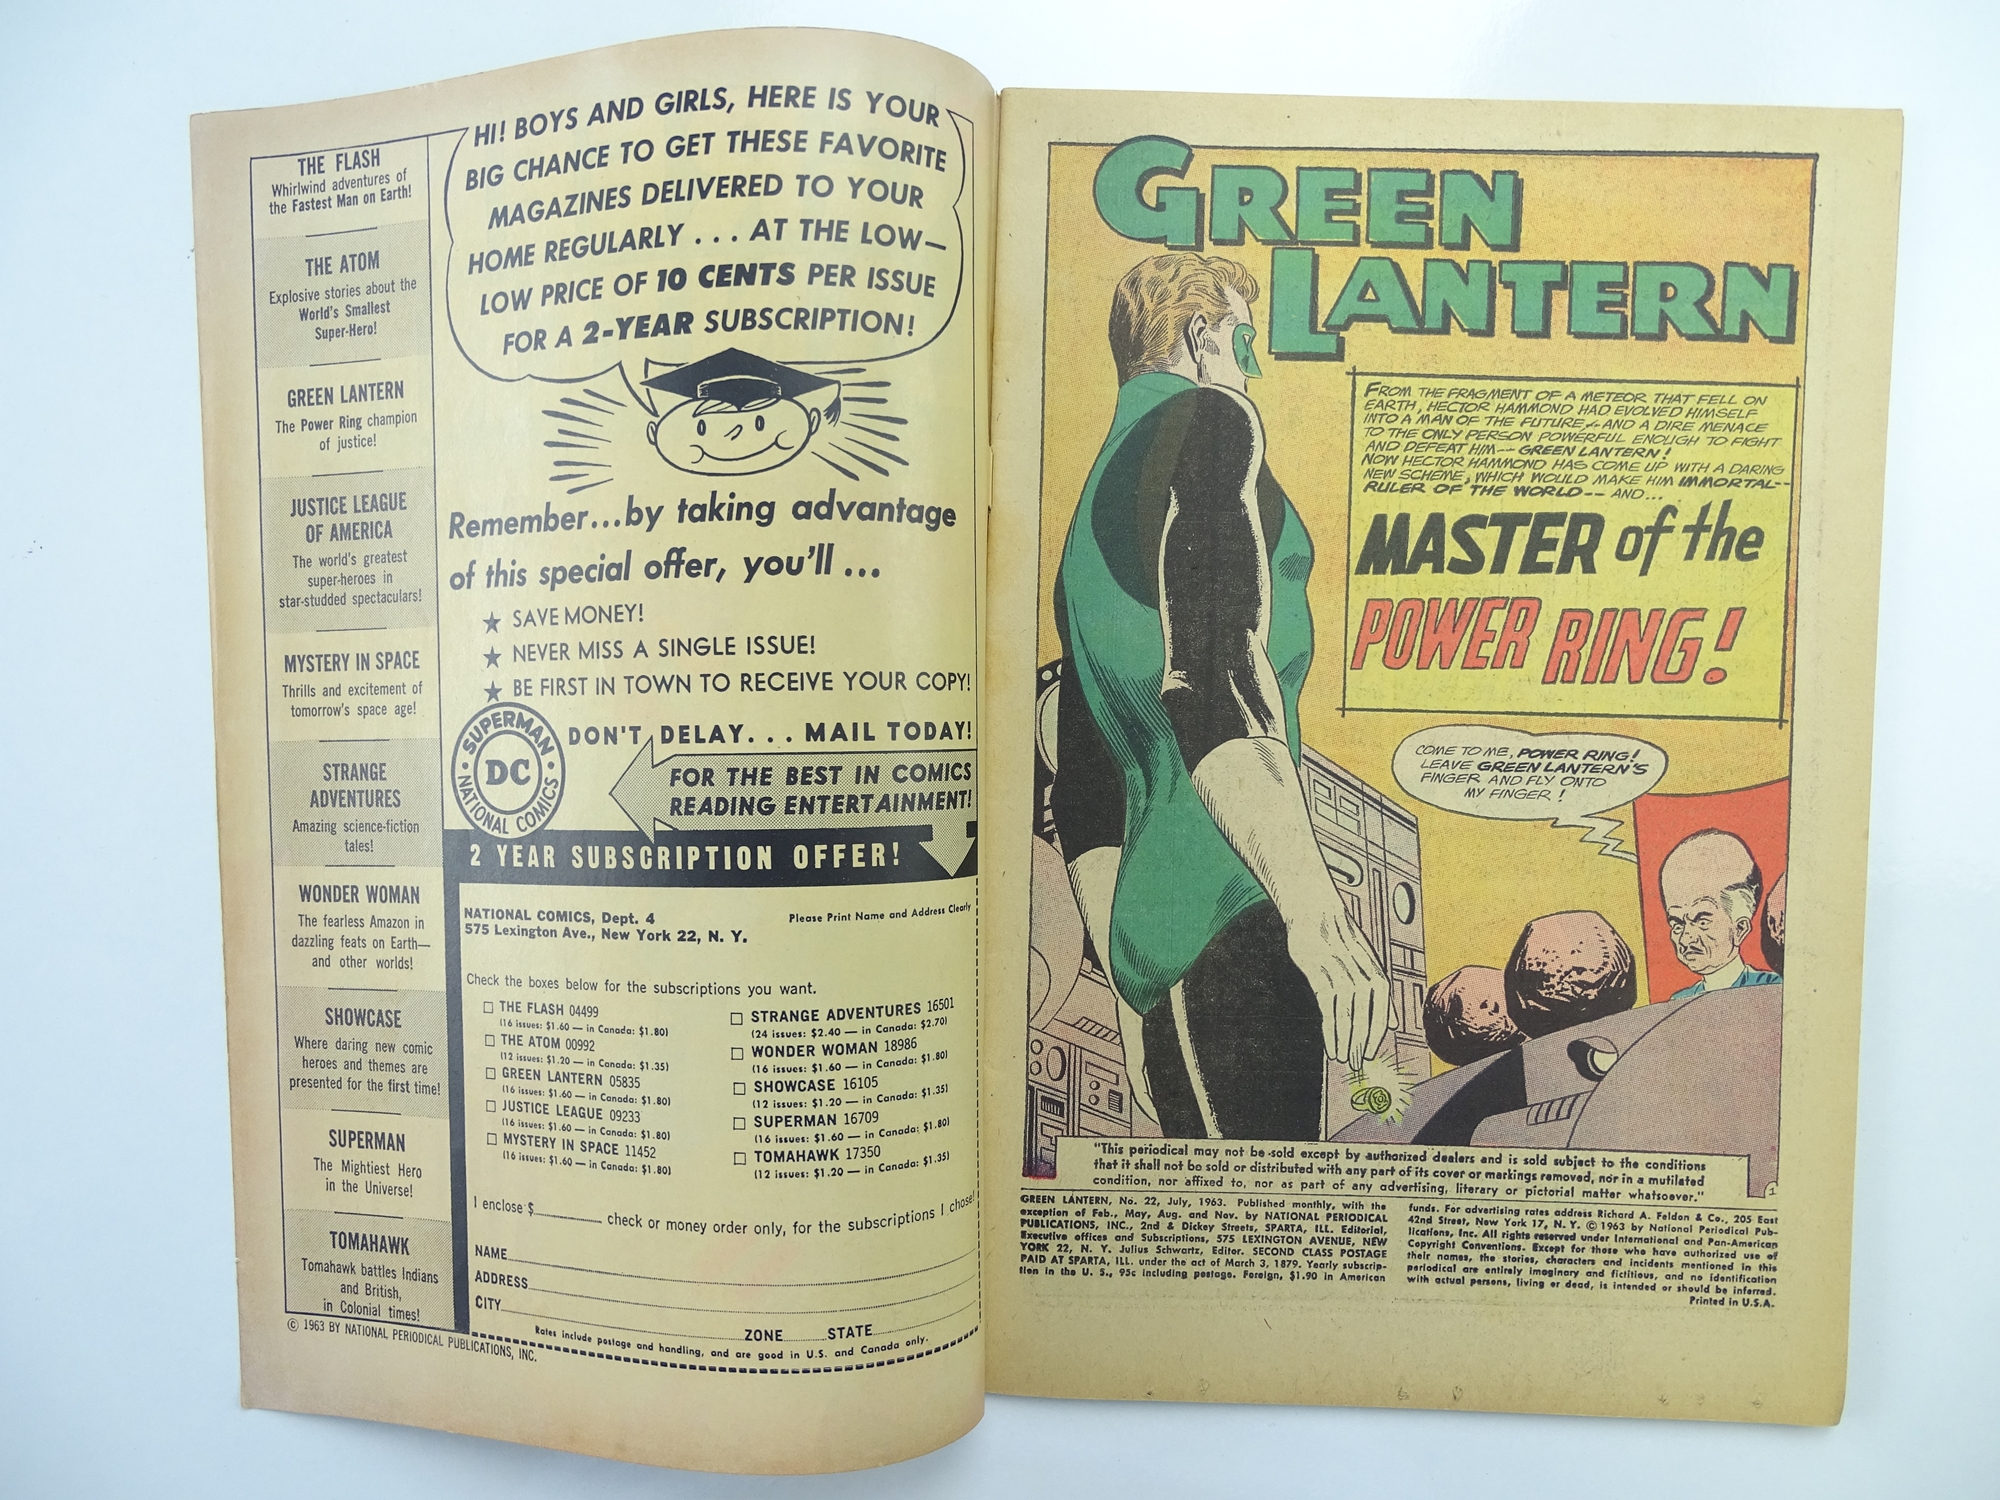 GREEN LANTERN # 22 - (1963 - DC - Cents Copy) - Hector Hammond appearance + Jordan Brothers backup - Image 3 of 7